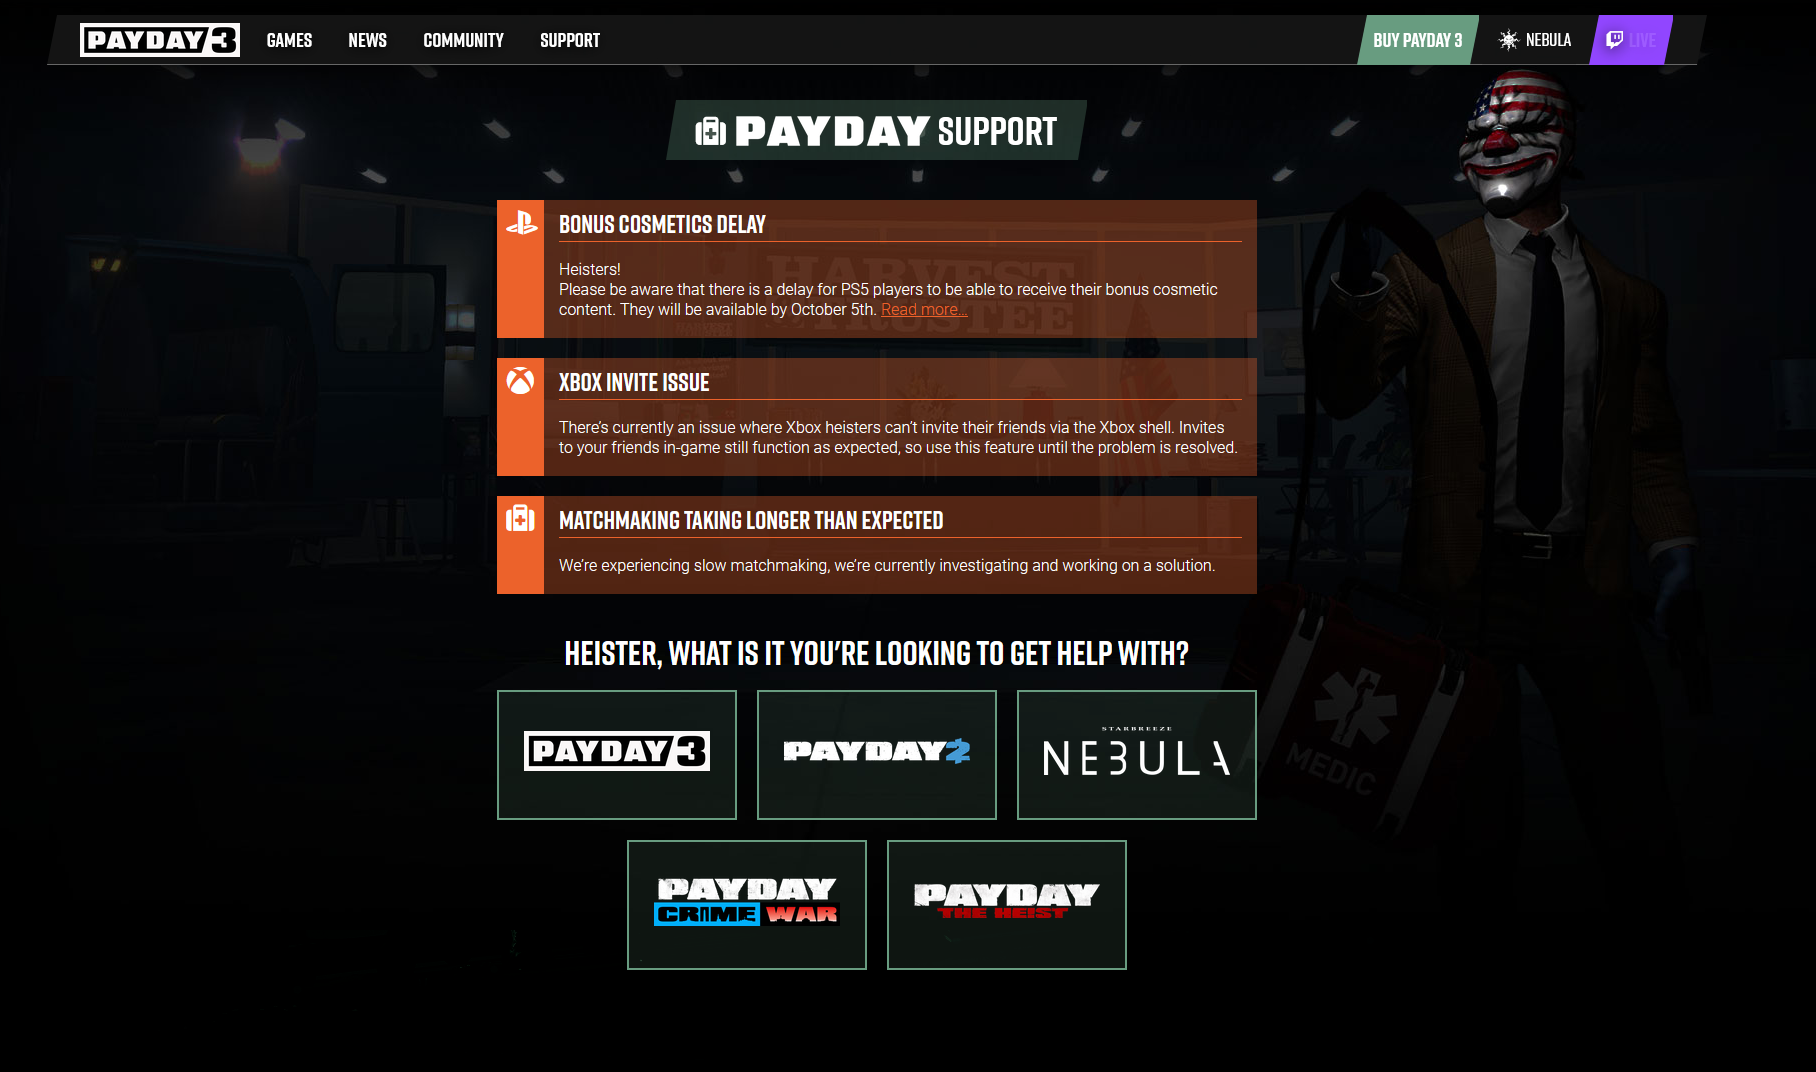 The official Payday 3 support page with disclaimers about delayed cosmetics on PlayStation 5, issues with invites on Xbox, and slow matchmaking across the game.